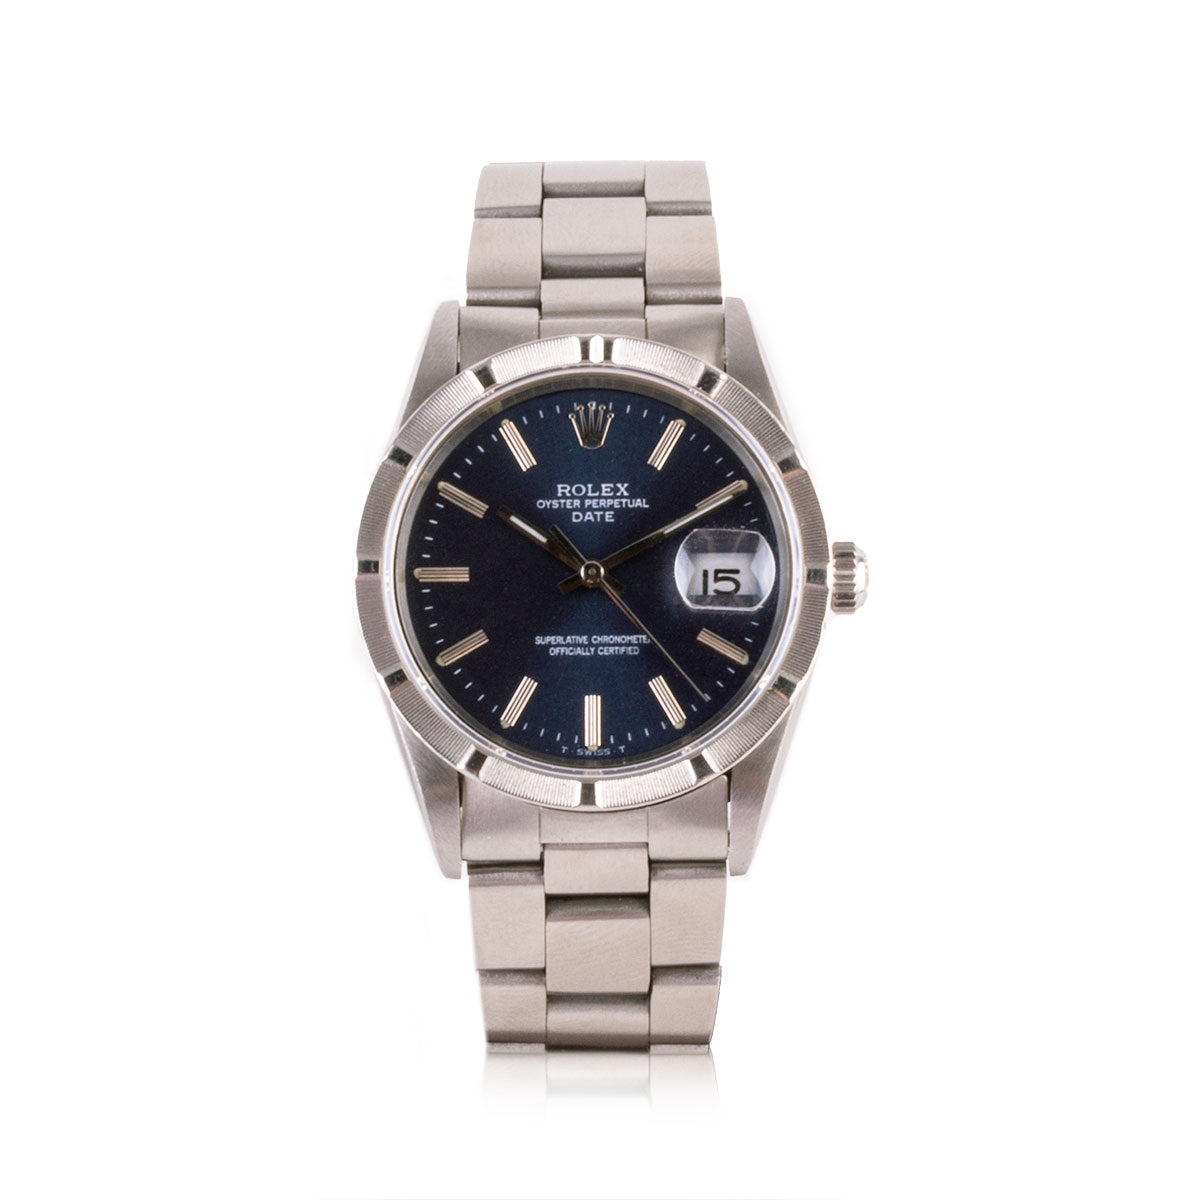 Second-hand watch - Rolex - Oyster Perpetual Date - 5400€